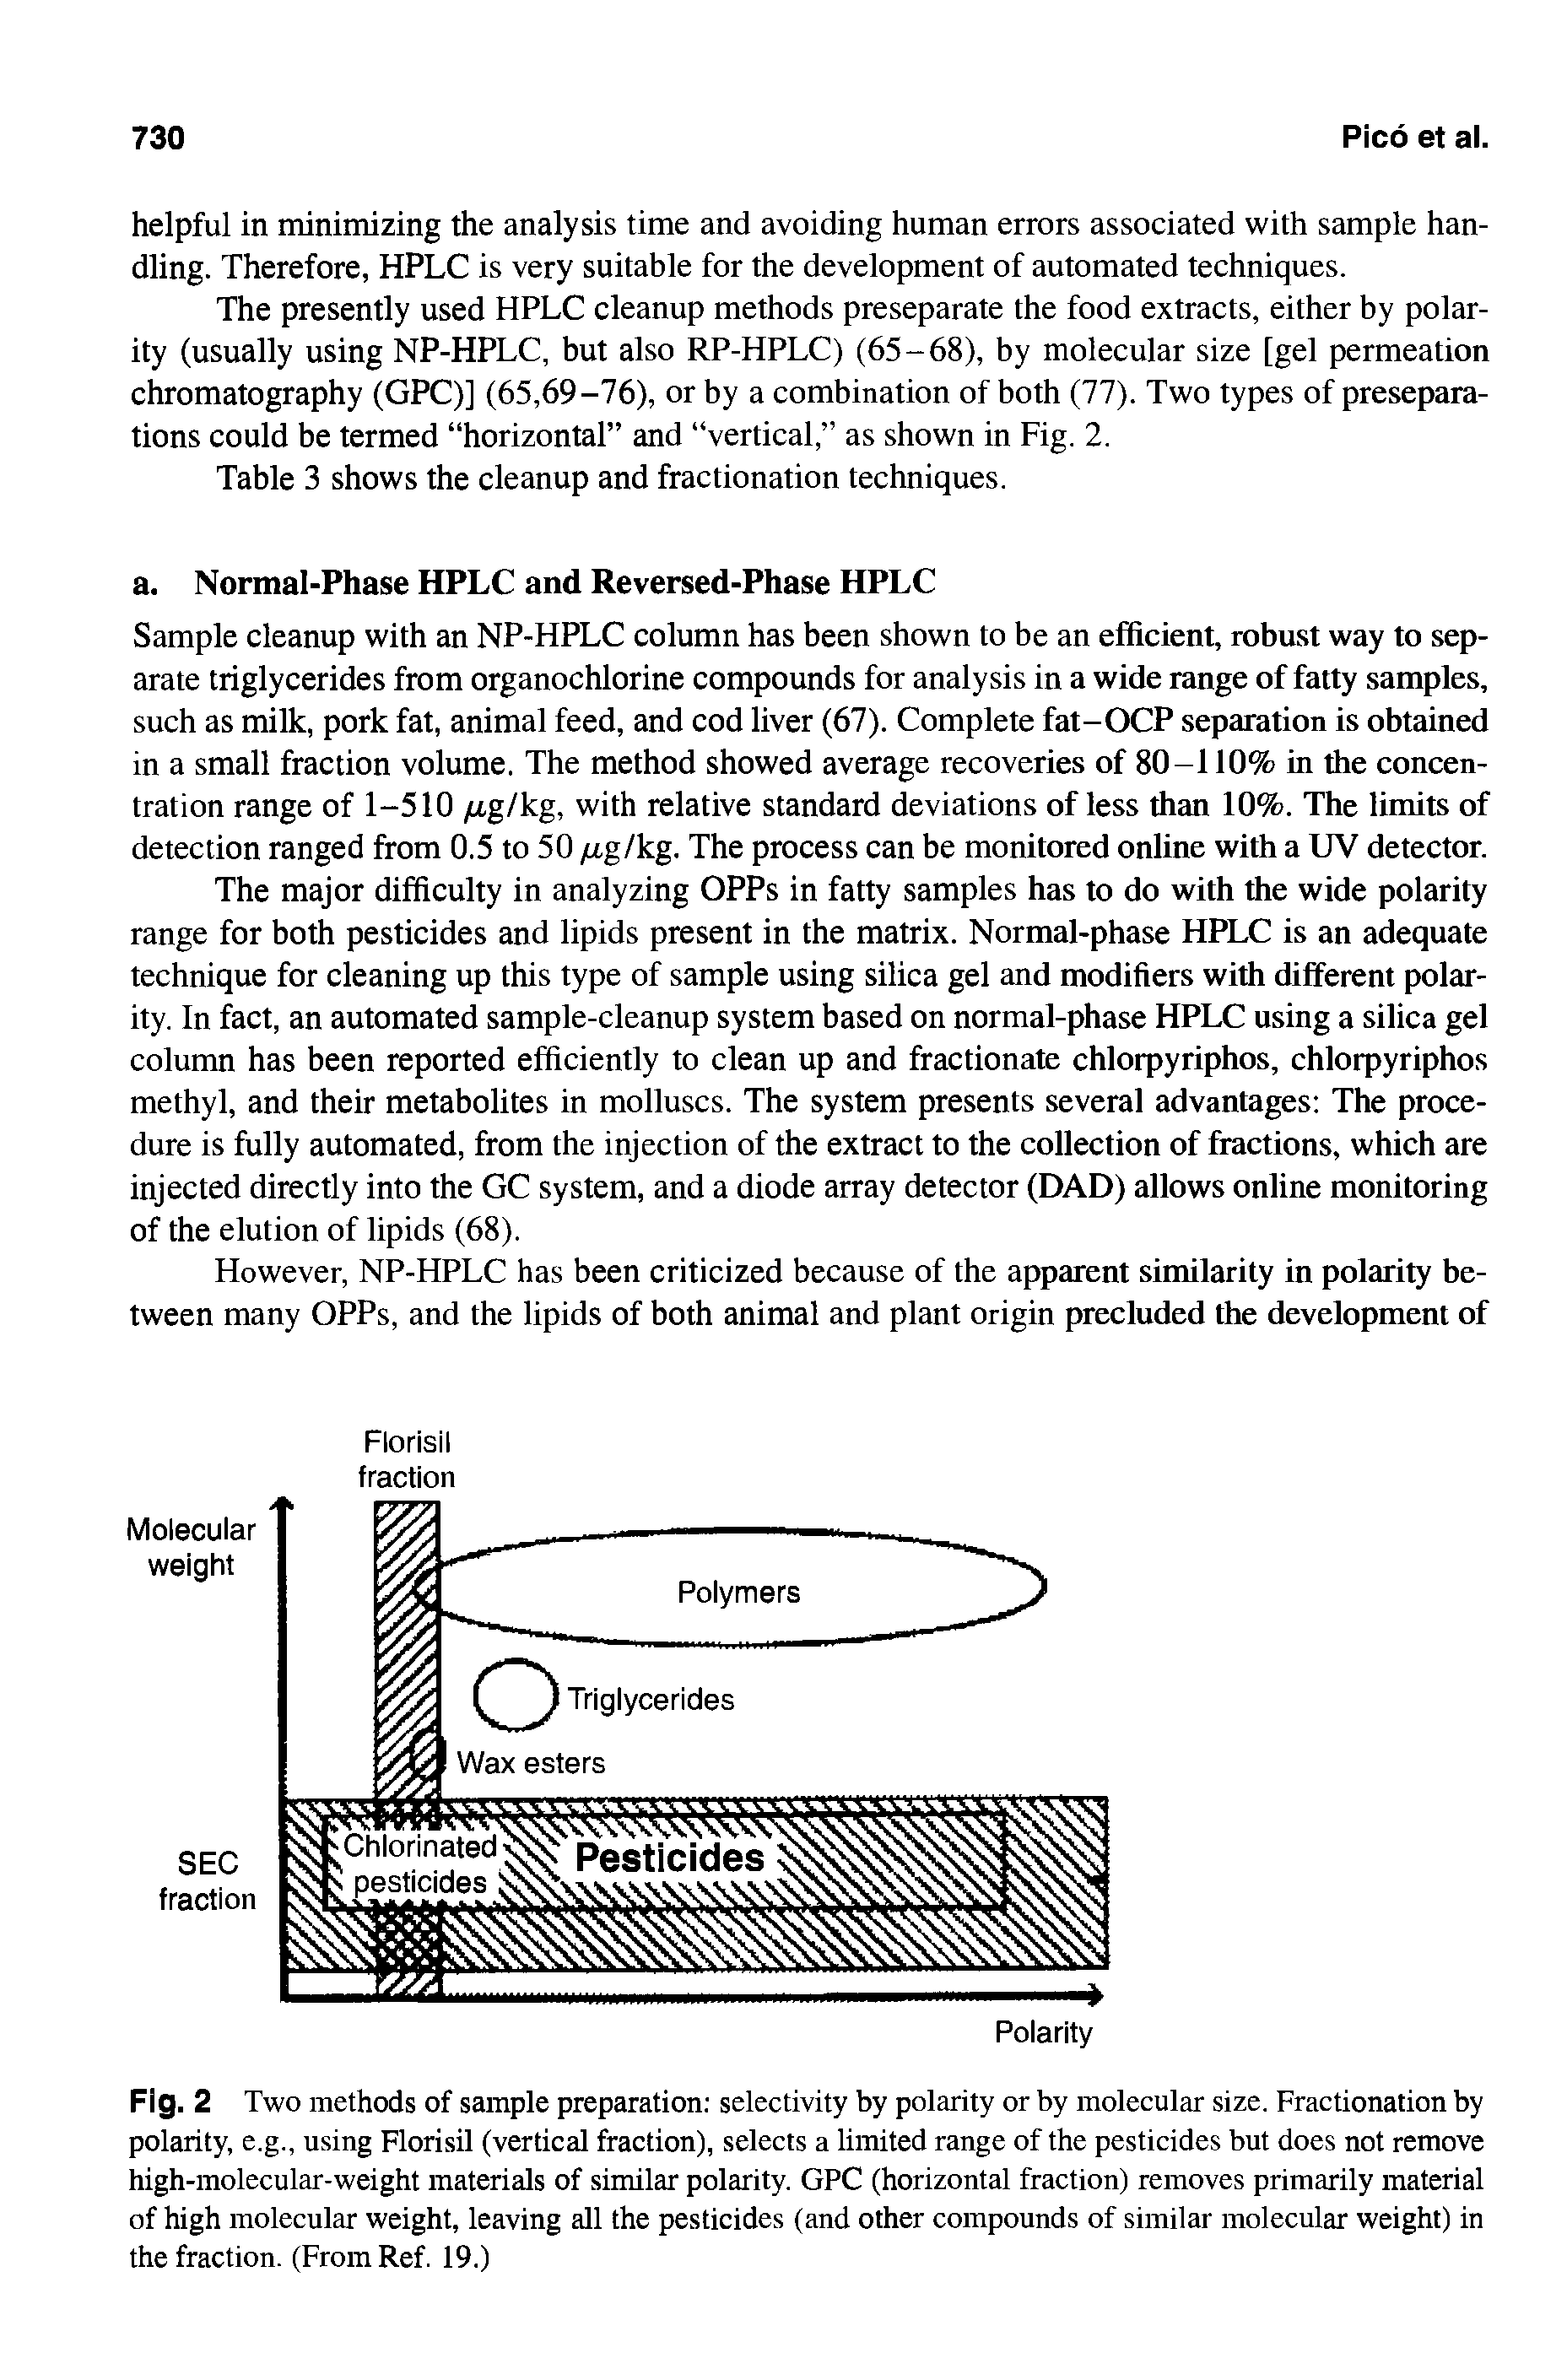 Fig. 2 Two methods of sample preparation selectivity by polarity or by molecular size. Fractionation by polarity, e.g., using Florisil (vertical fraction), selects a limited range of the pesticides but does not remove high-molecular-weight materials of similar polarity. GPC (horizontal fraction) removes primarily material of high molecular weight, leaving all the pesticides (and other compounds of similar molecular weight) in the fraction. (From Ref. 19.)...